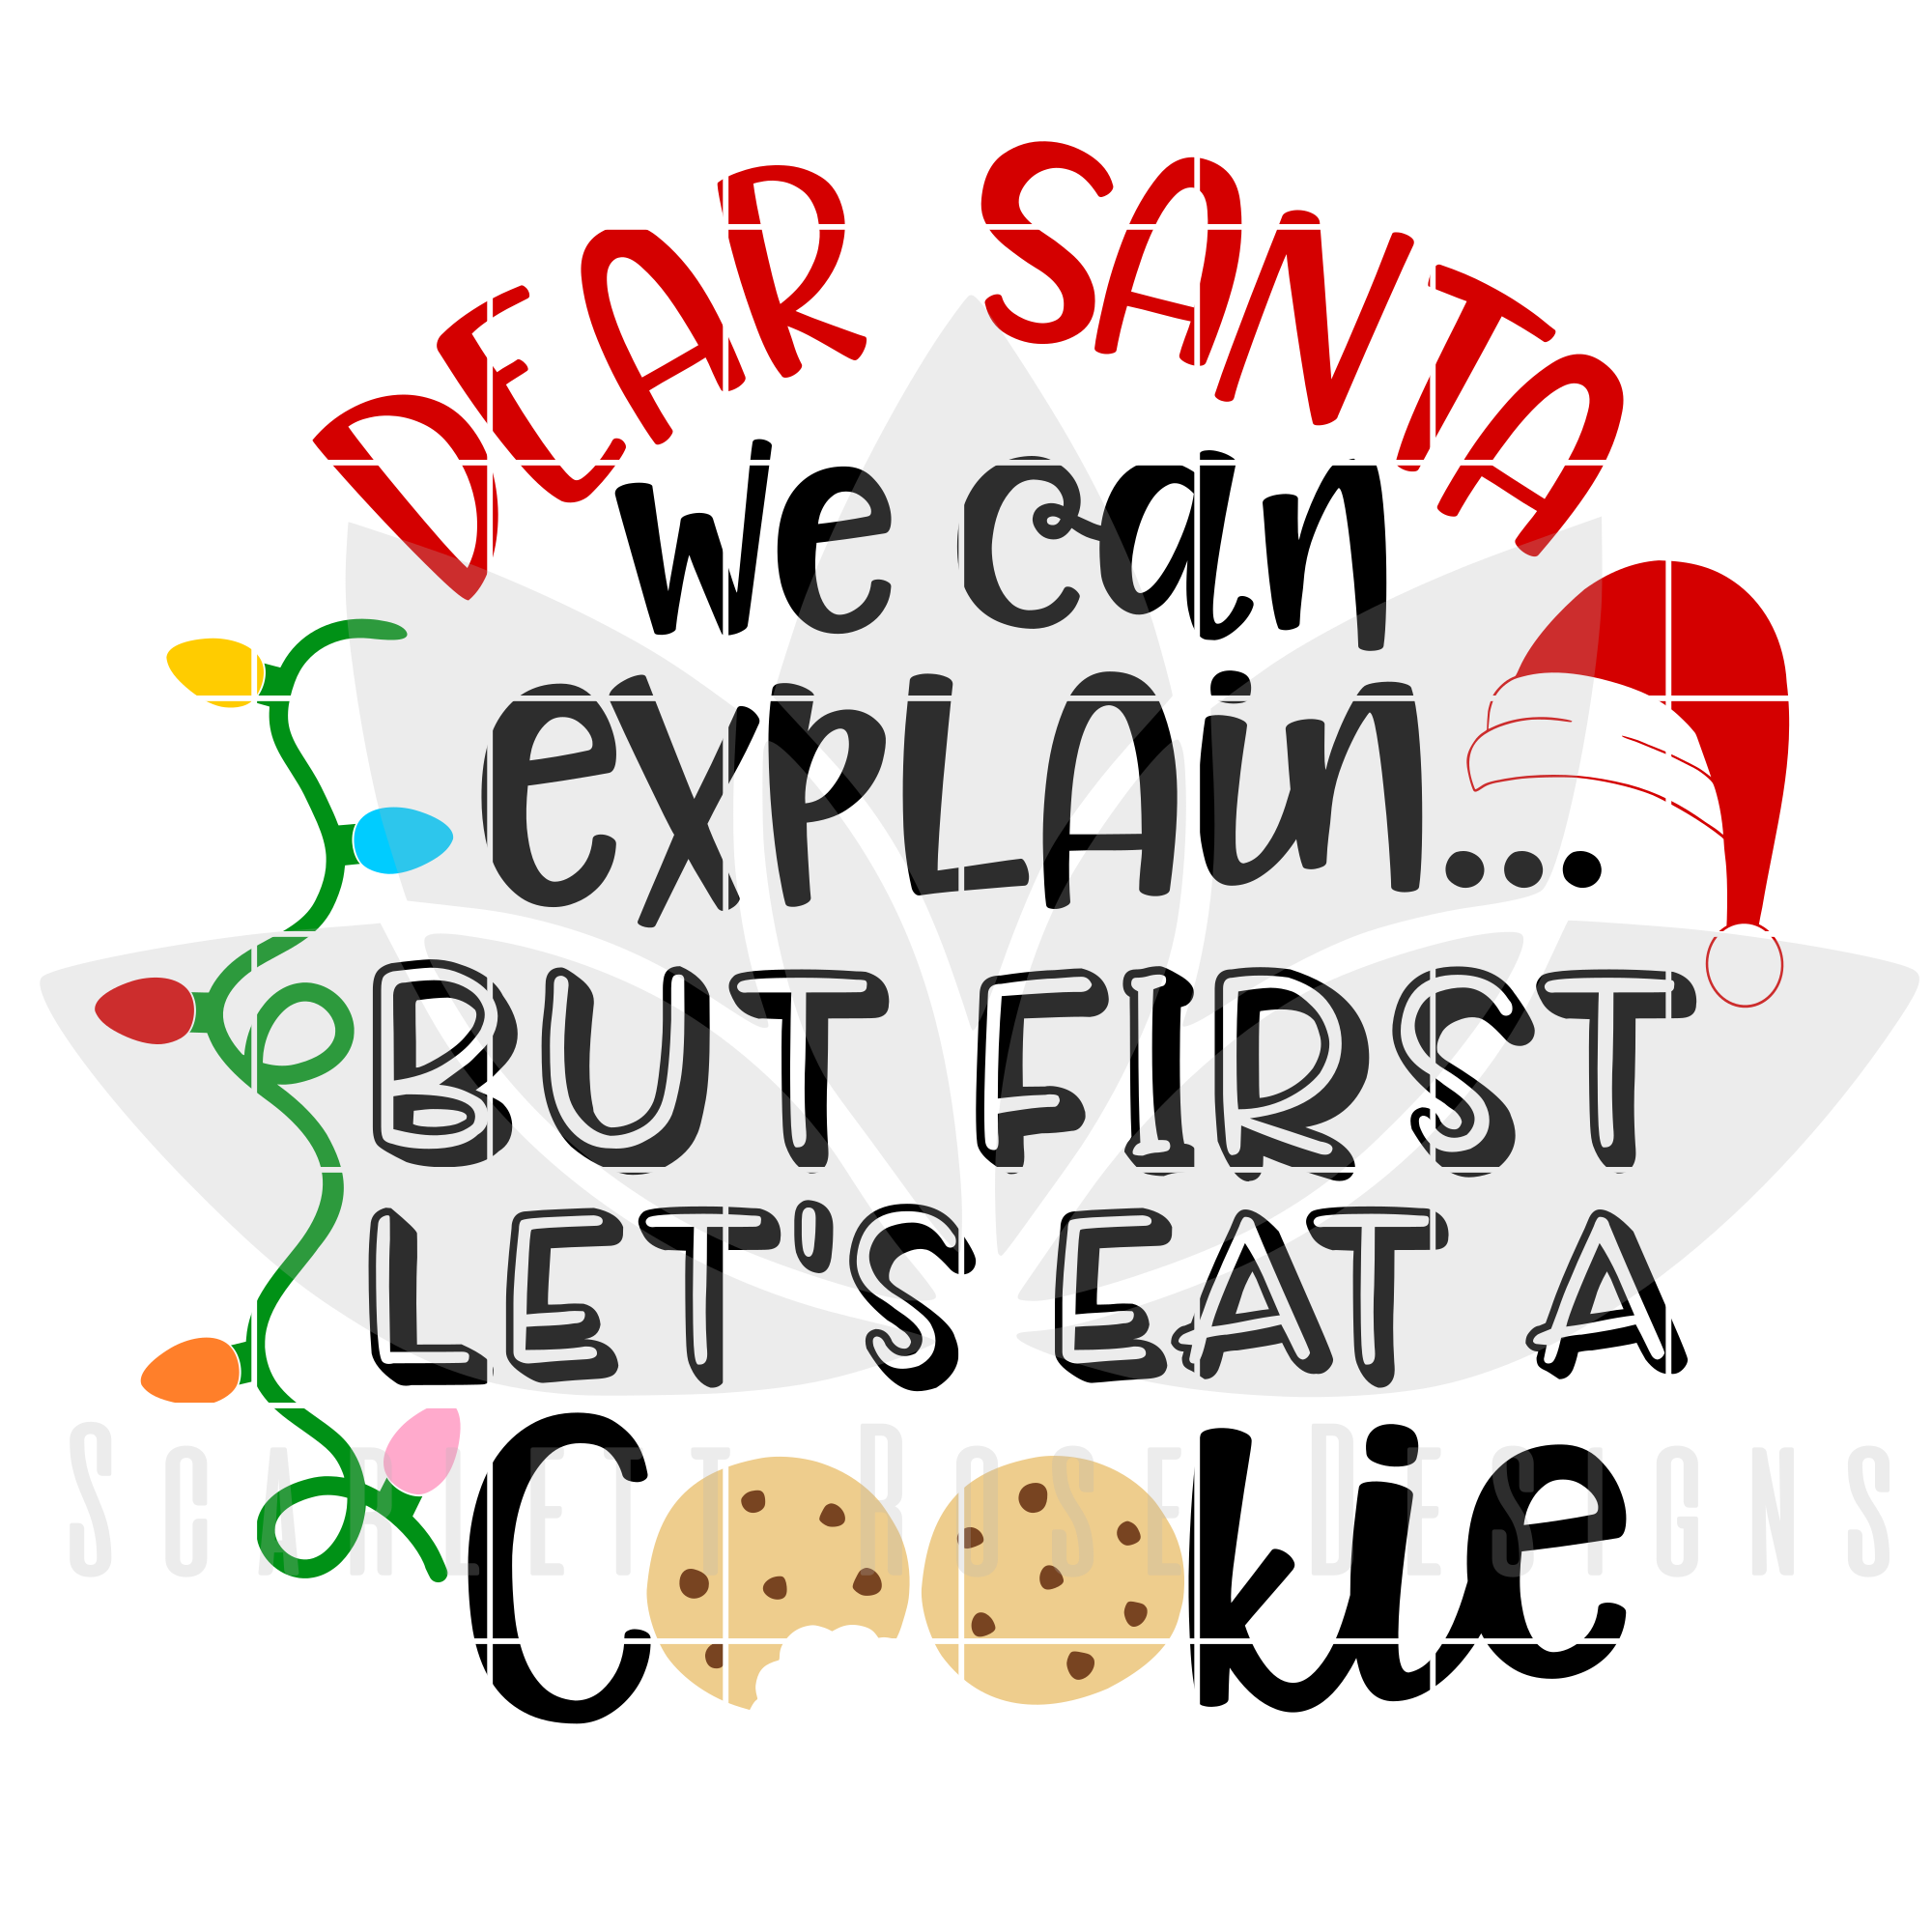 Download Christmas SVG, Dear Santa We Can Explain But First Lets Eat A Cookie ,Santa Cookie Plate cut ...